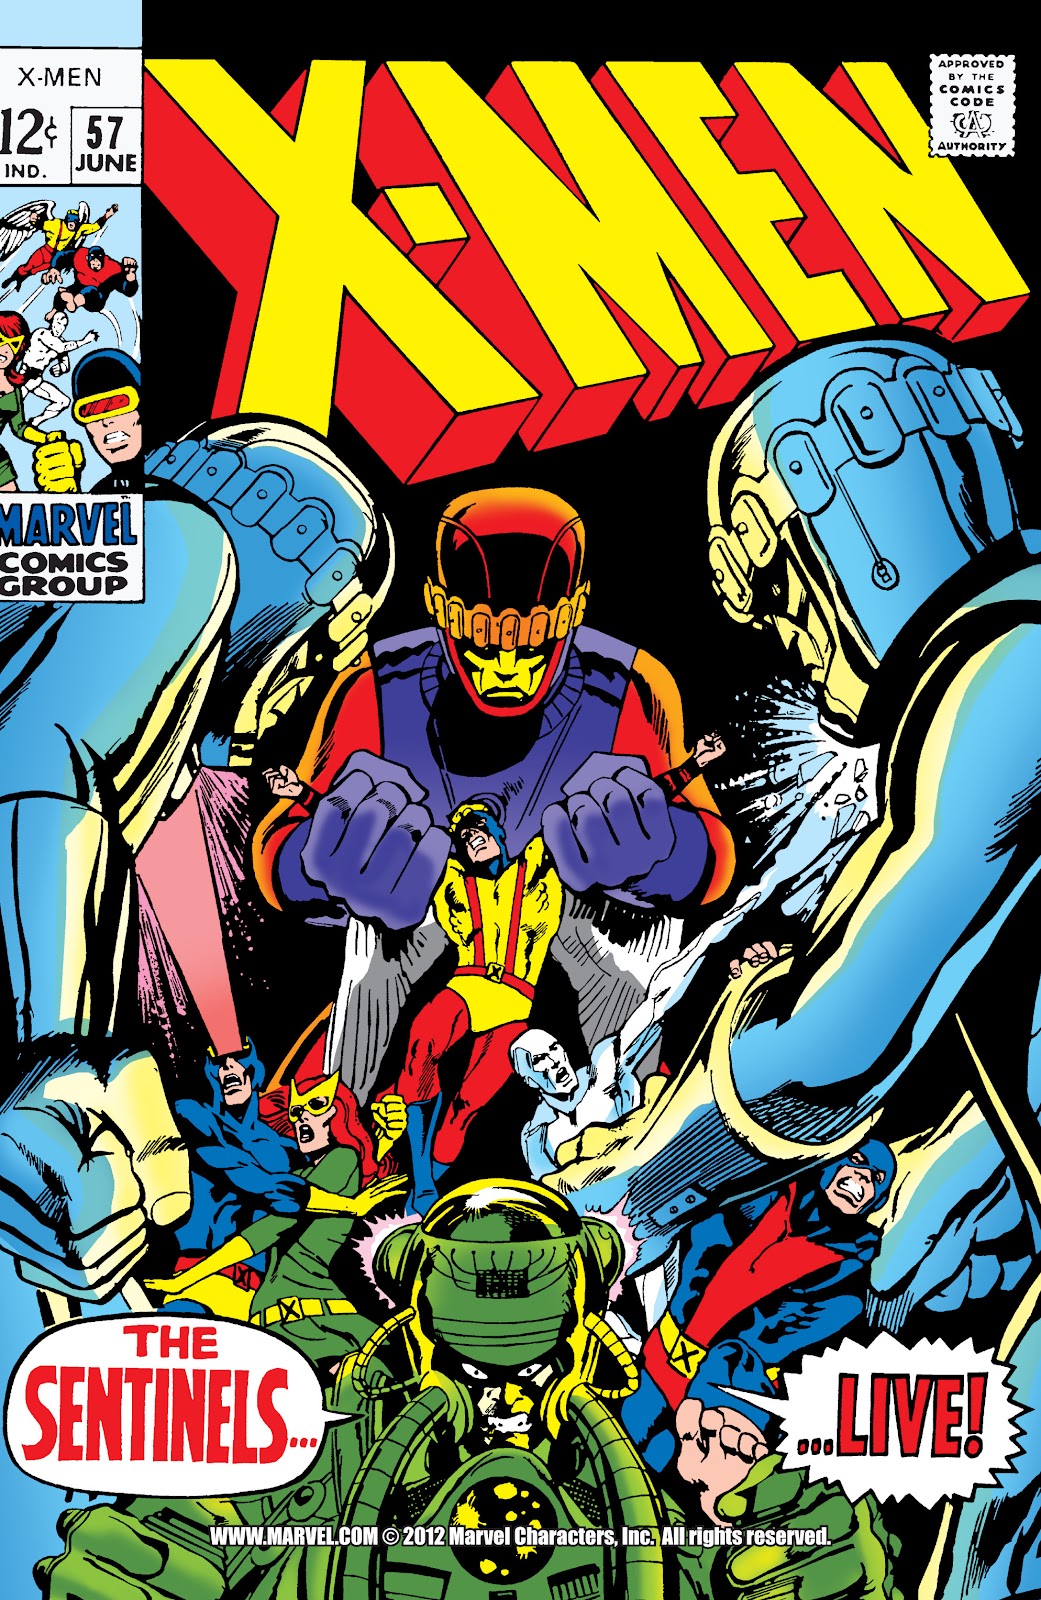 Uncanny X Men 1963 Issue 275, Read Uncanny X Men 1963 Issue 275 comic  online in high quality. Read Full Comic online for free - Read comics  online in high quality .